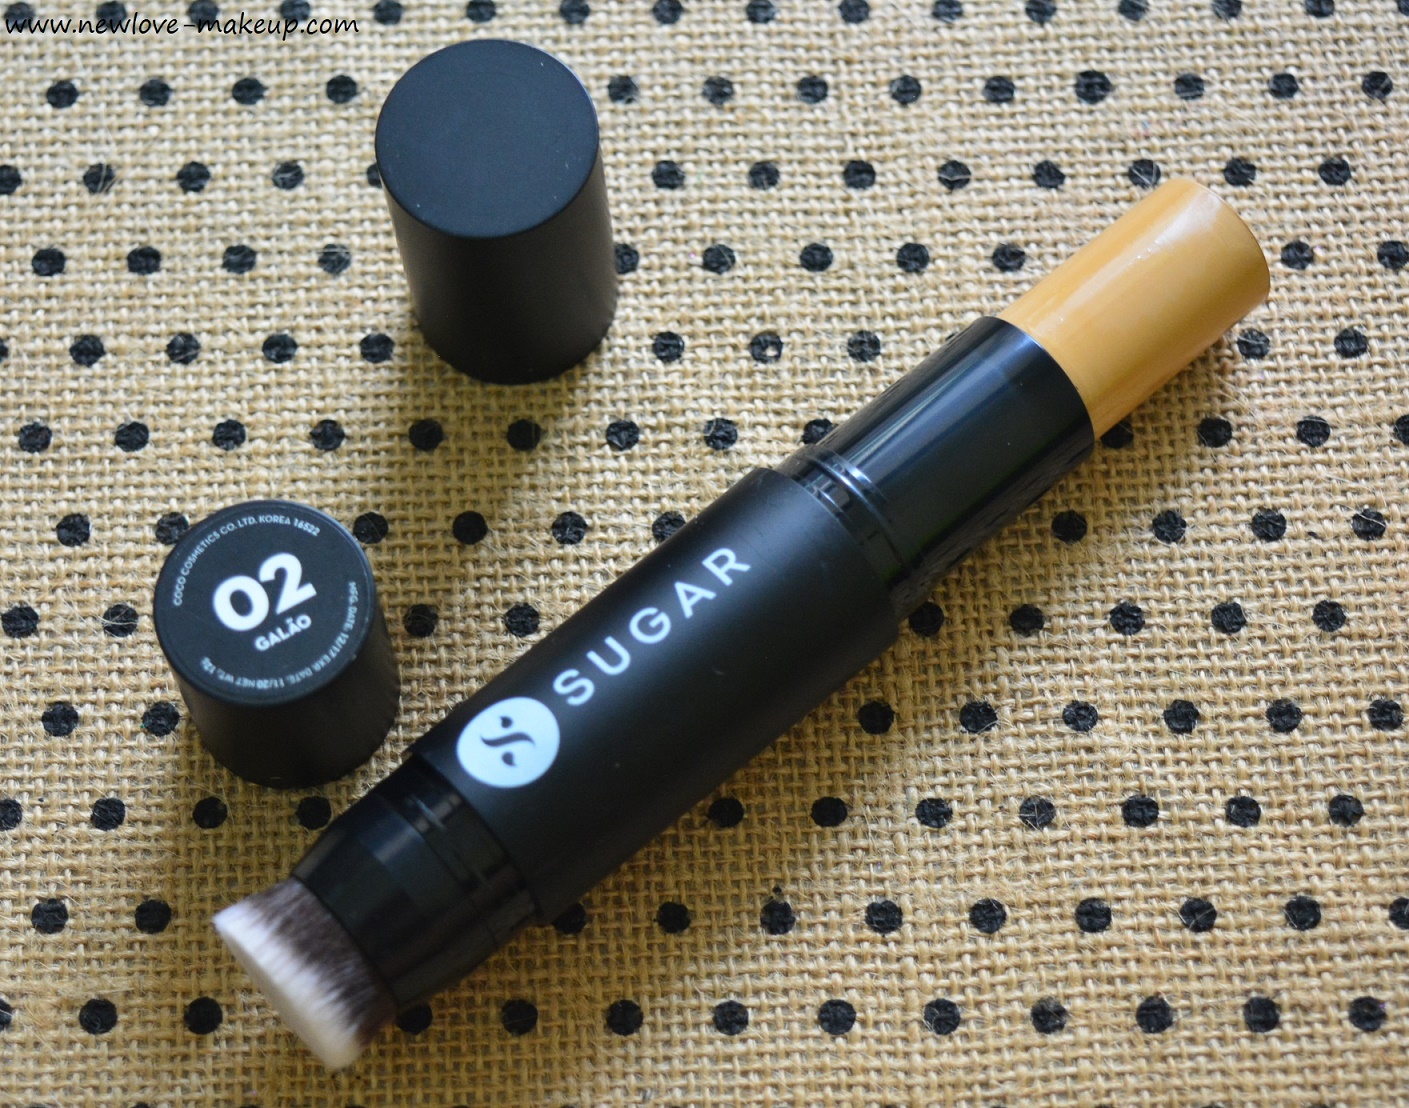 Sugar Ace of Face Foundation Sticks Review, Swatches, Demo, Wear Test